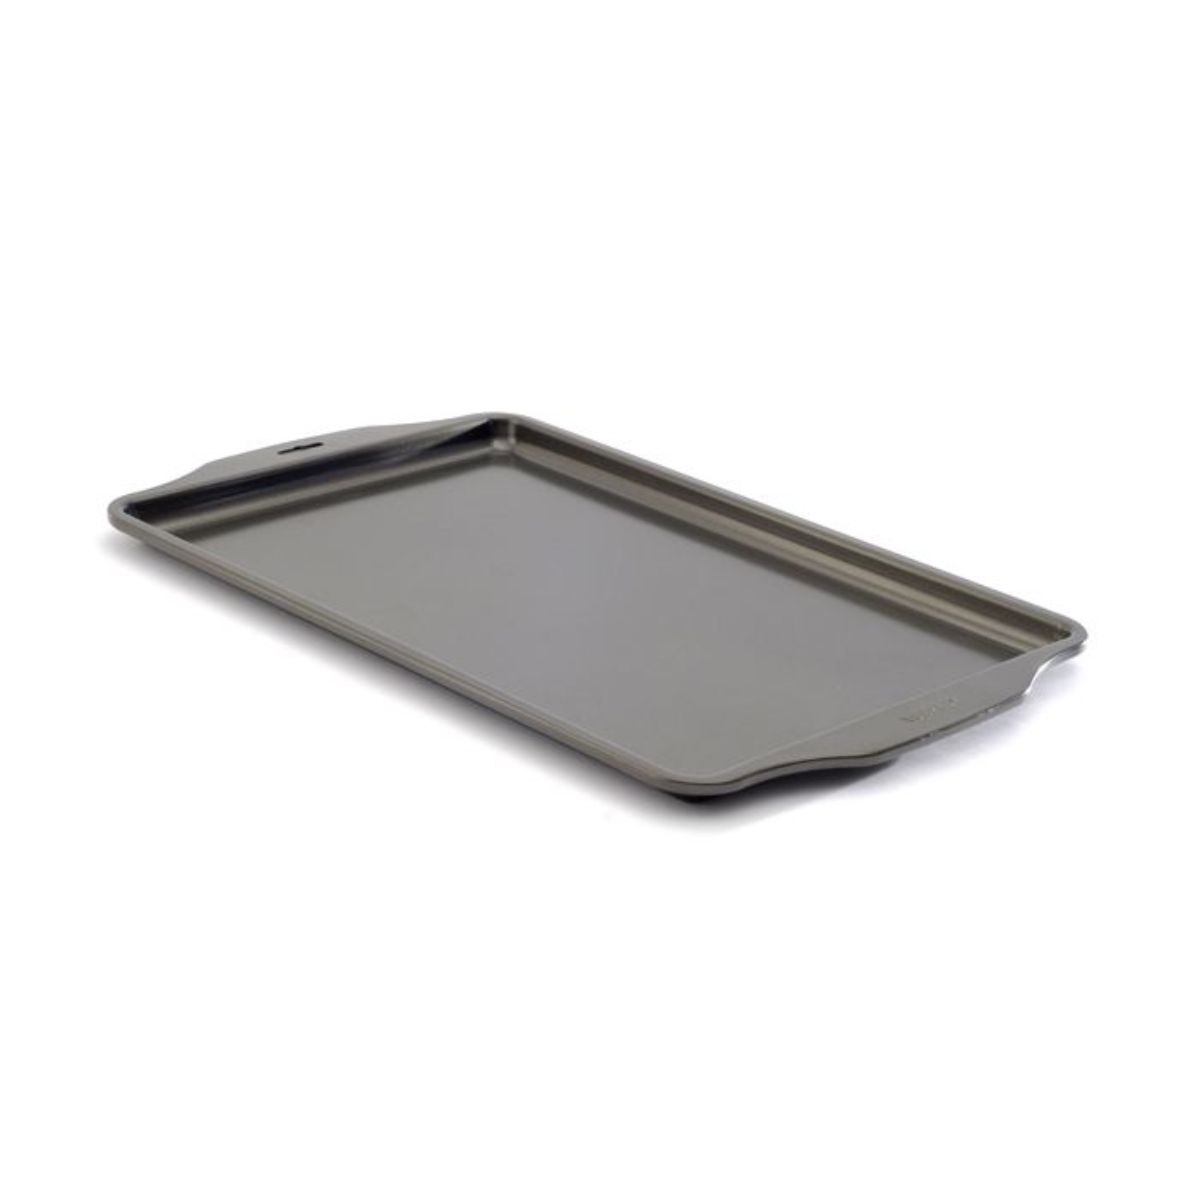 Norpro Stainless Steel Jelly Roll Pan 10 x 15 – the